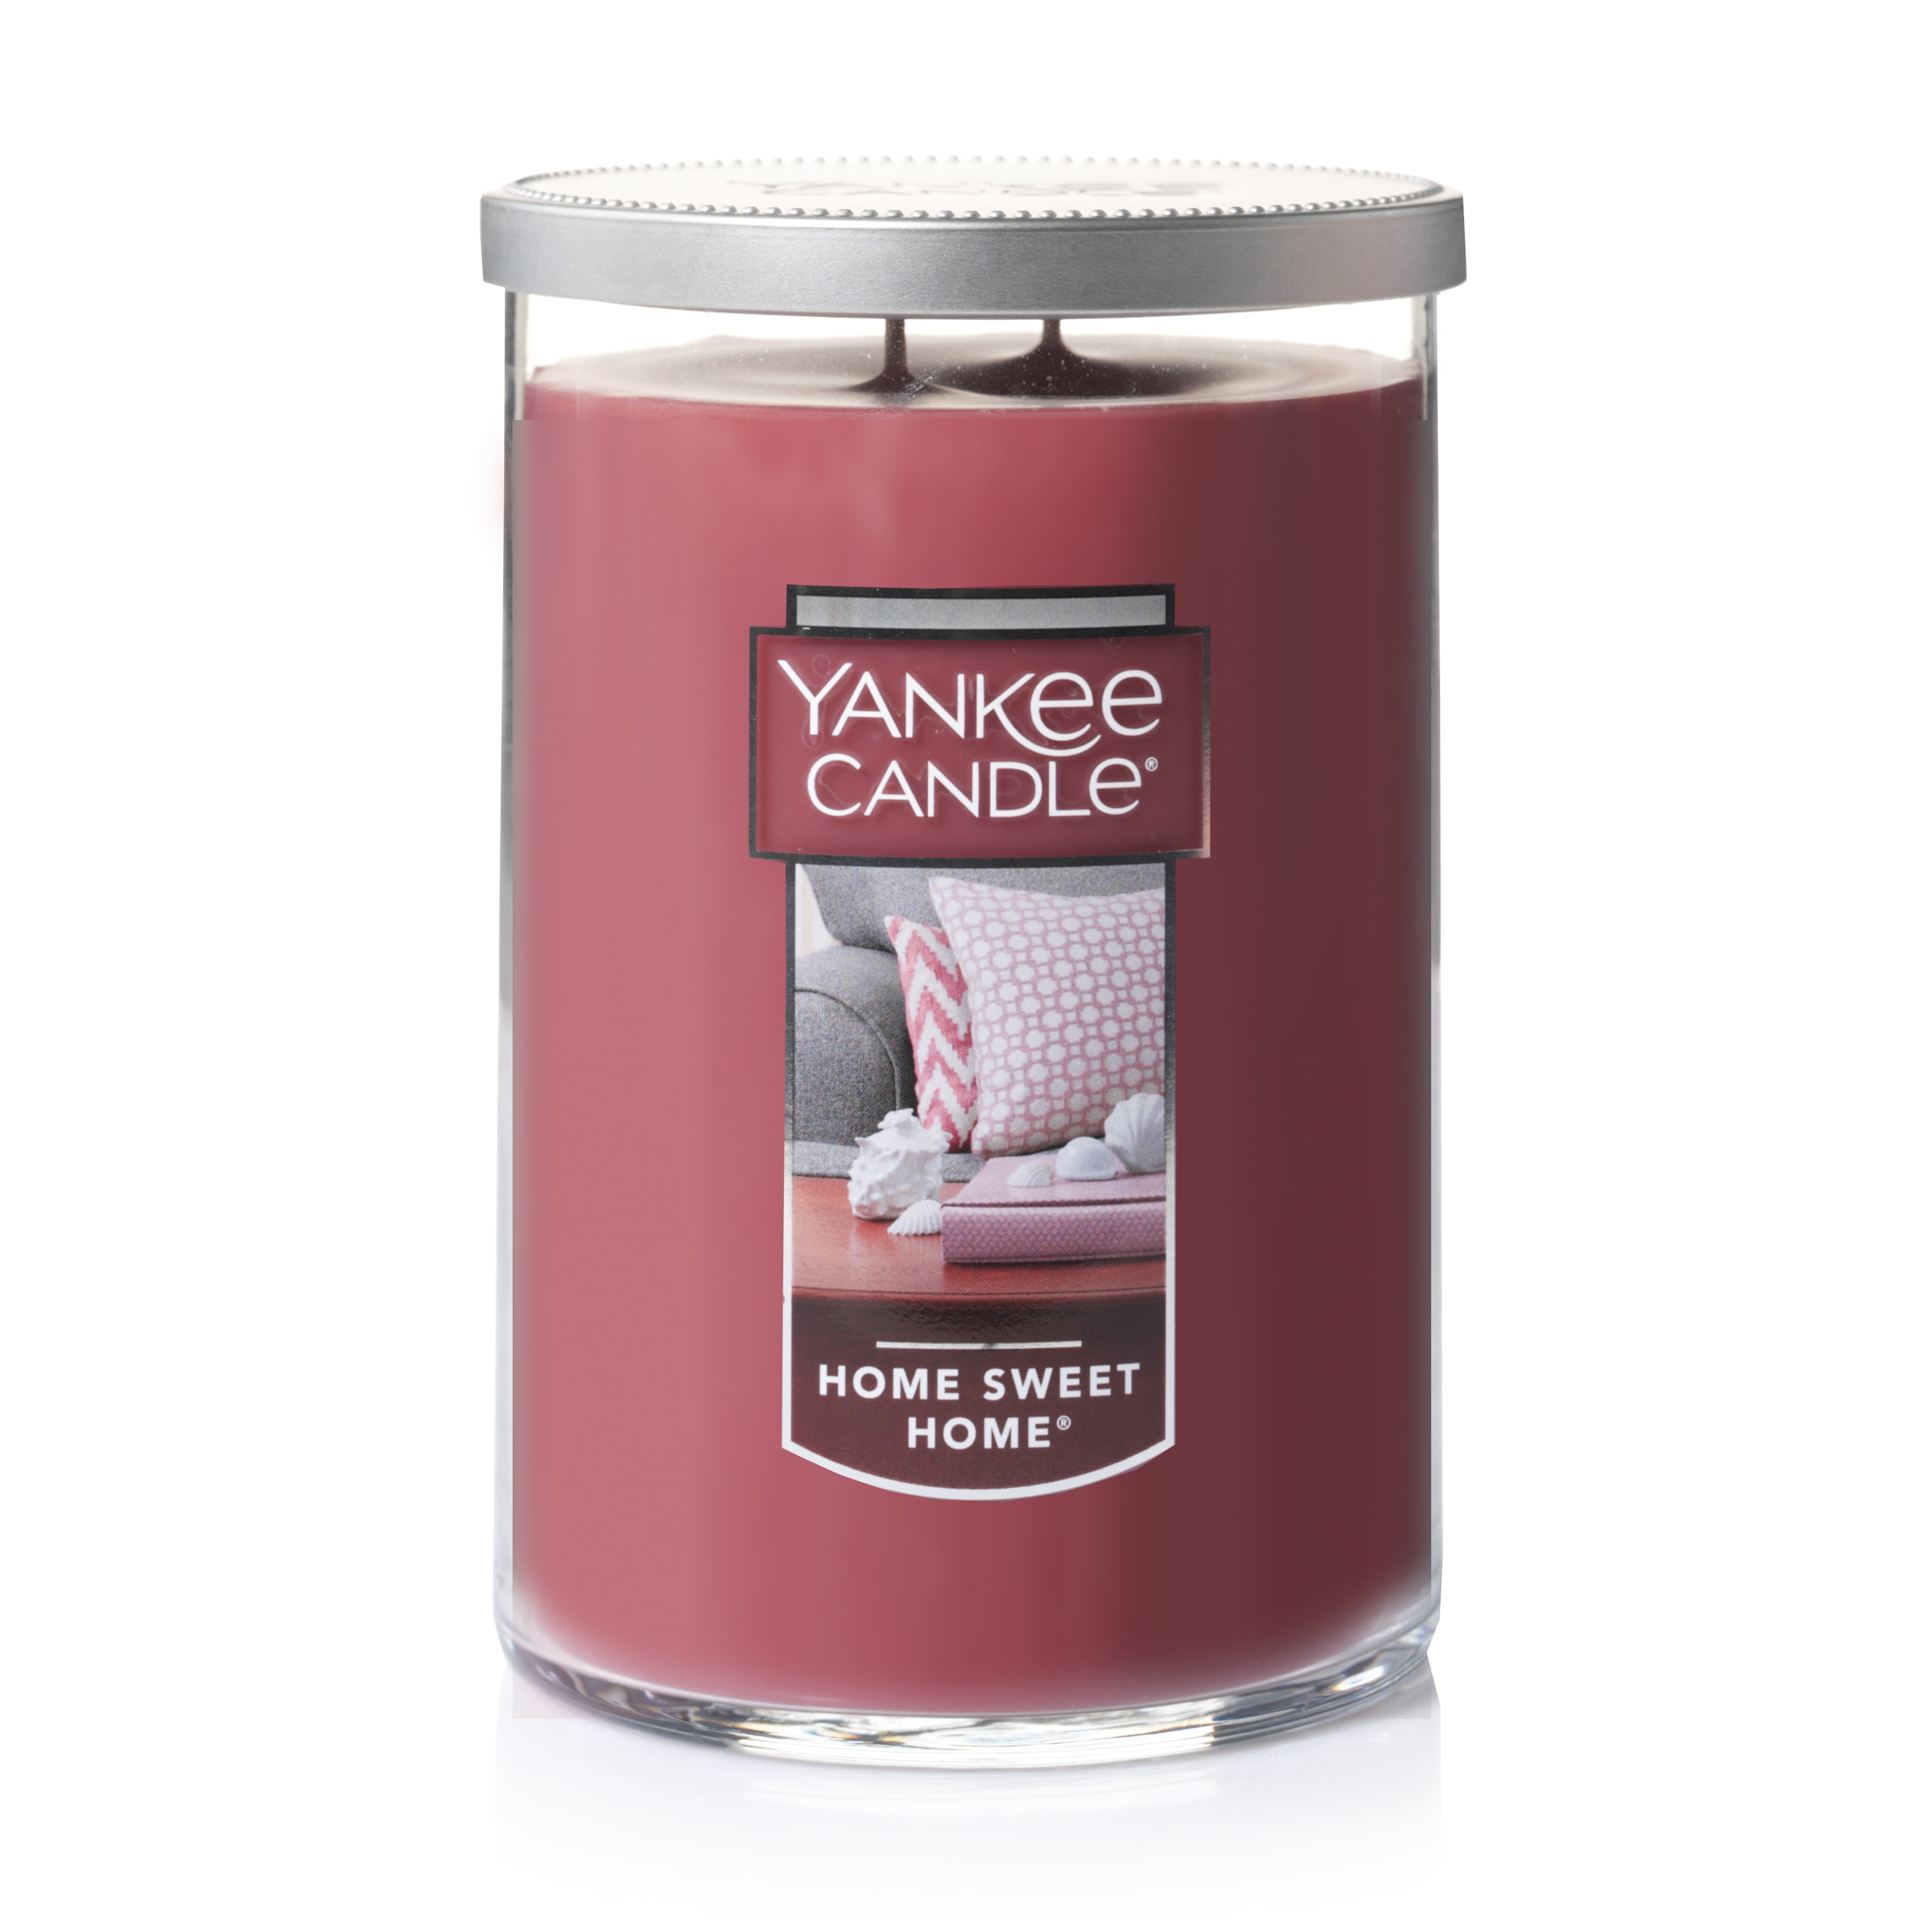 2 wick yankee candles